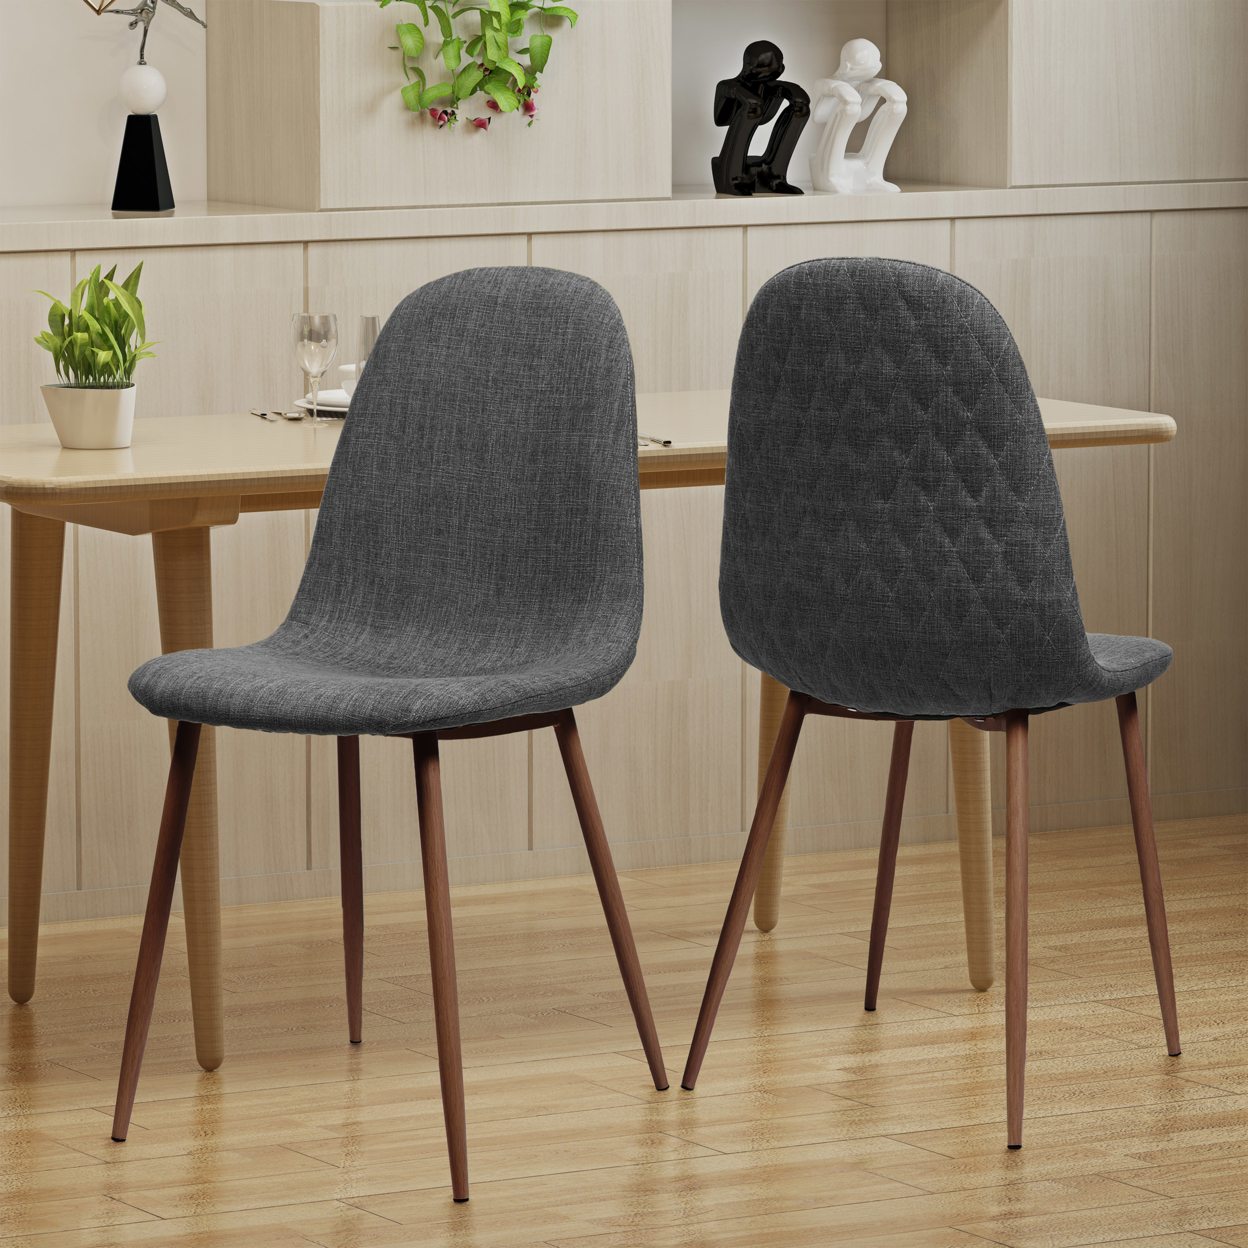 Camden Mid Century Fabric Dining Chairs With Wood Finished Legs - Set Of 2 - Wheat/Dark Walnut